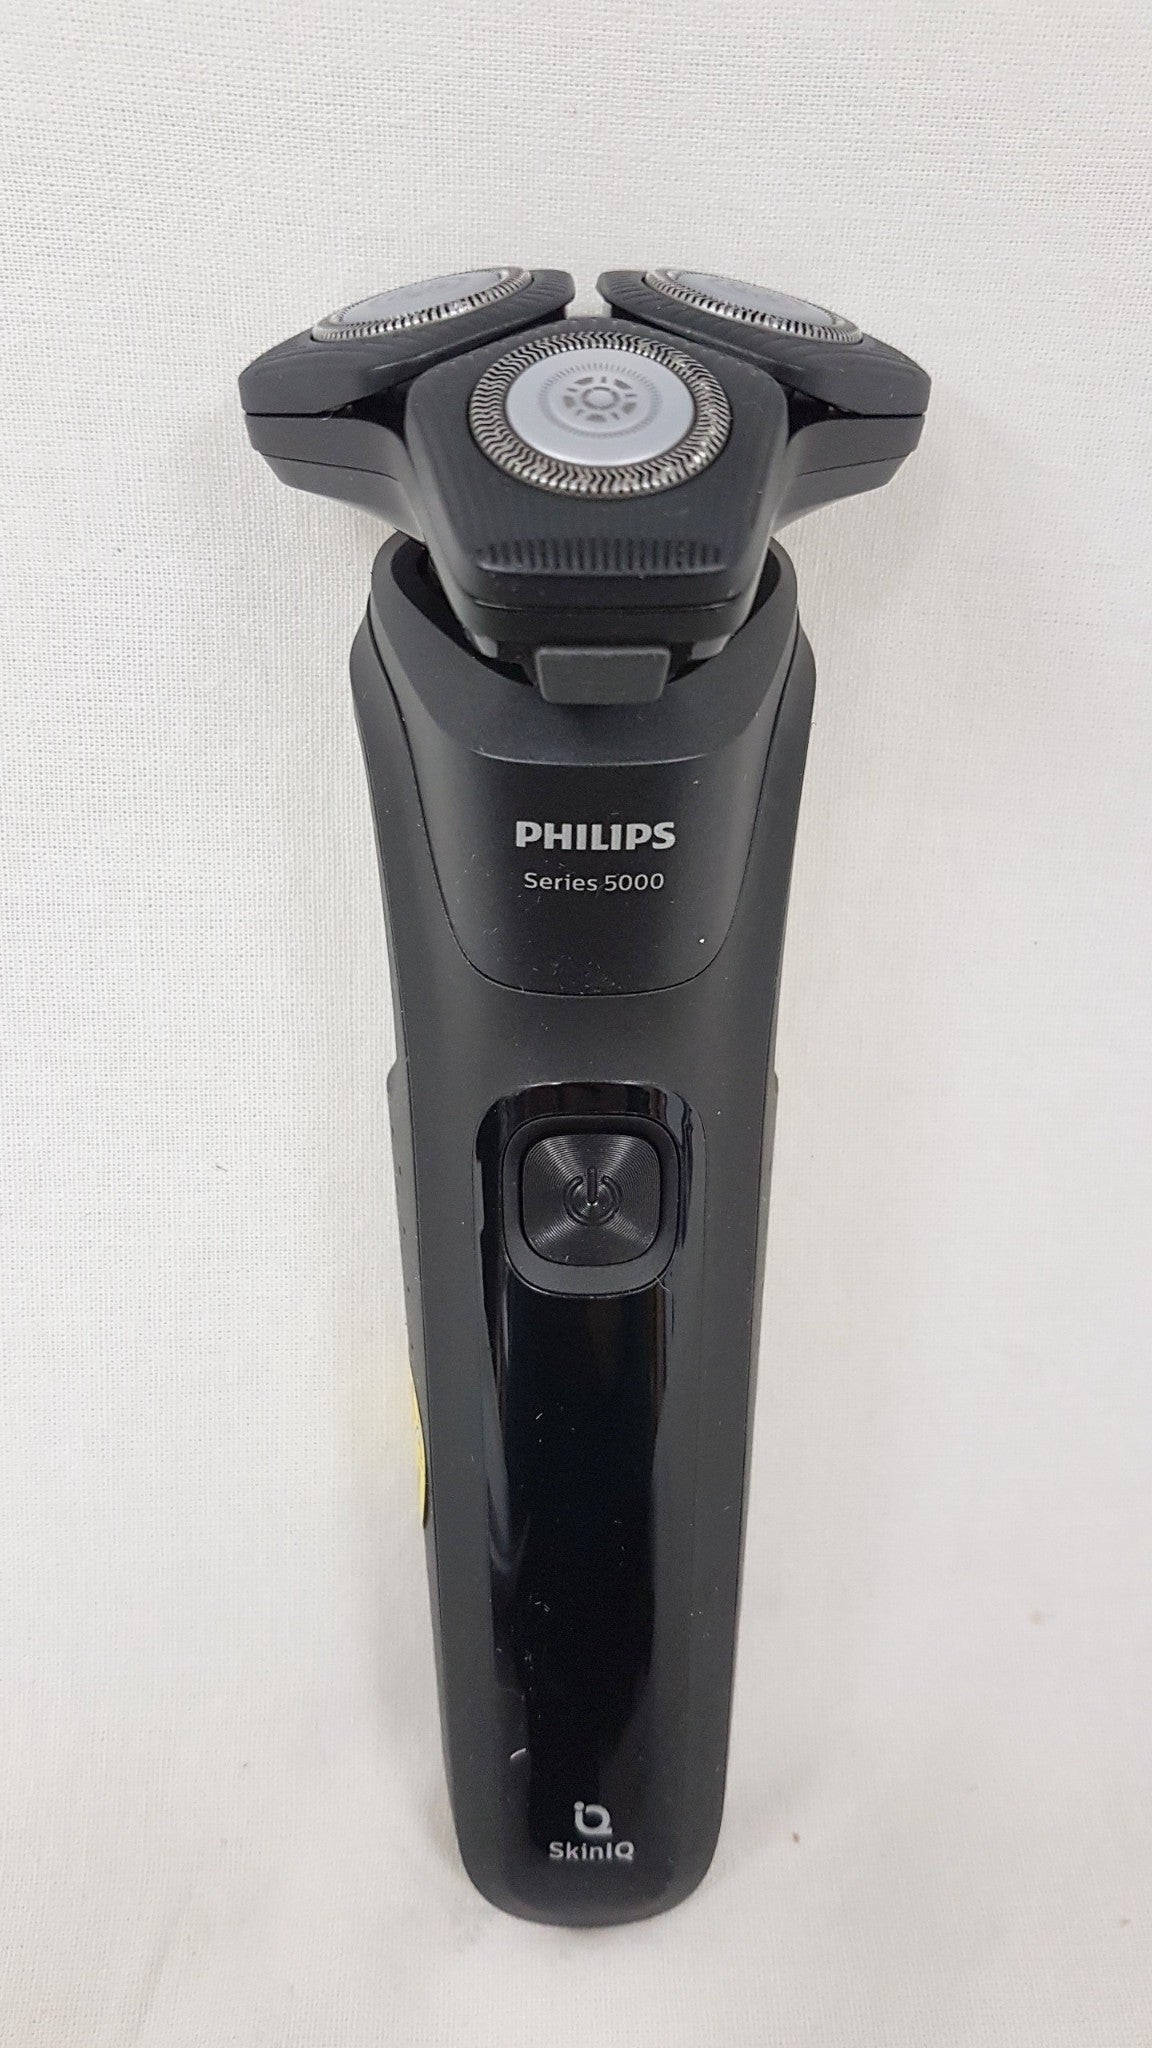 PHILIPS 5000 Series Wet & Dry Electric Shaver, S5588/25 NEW OPEN